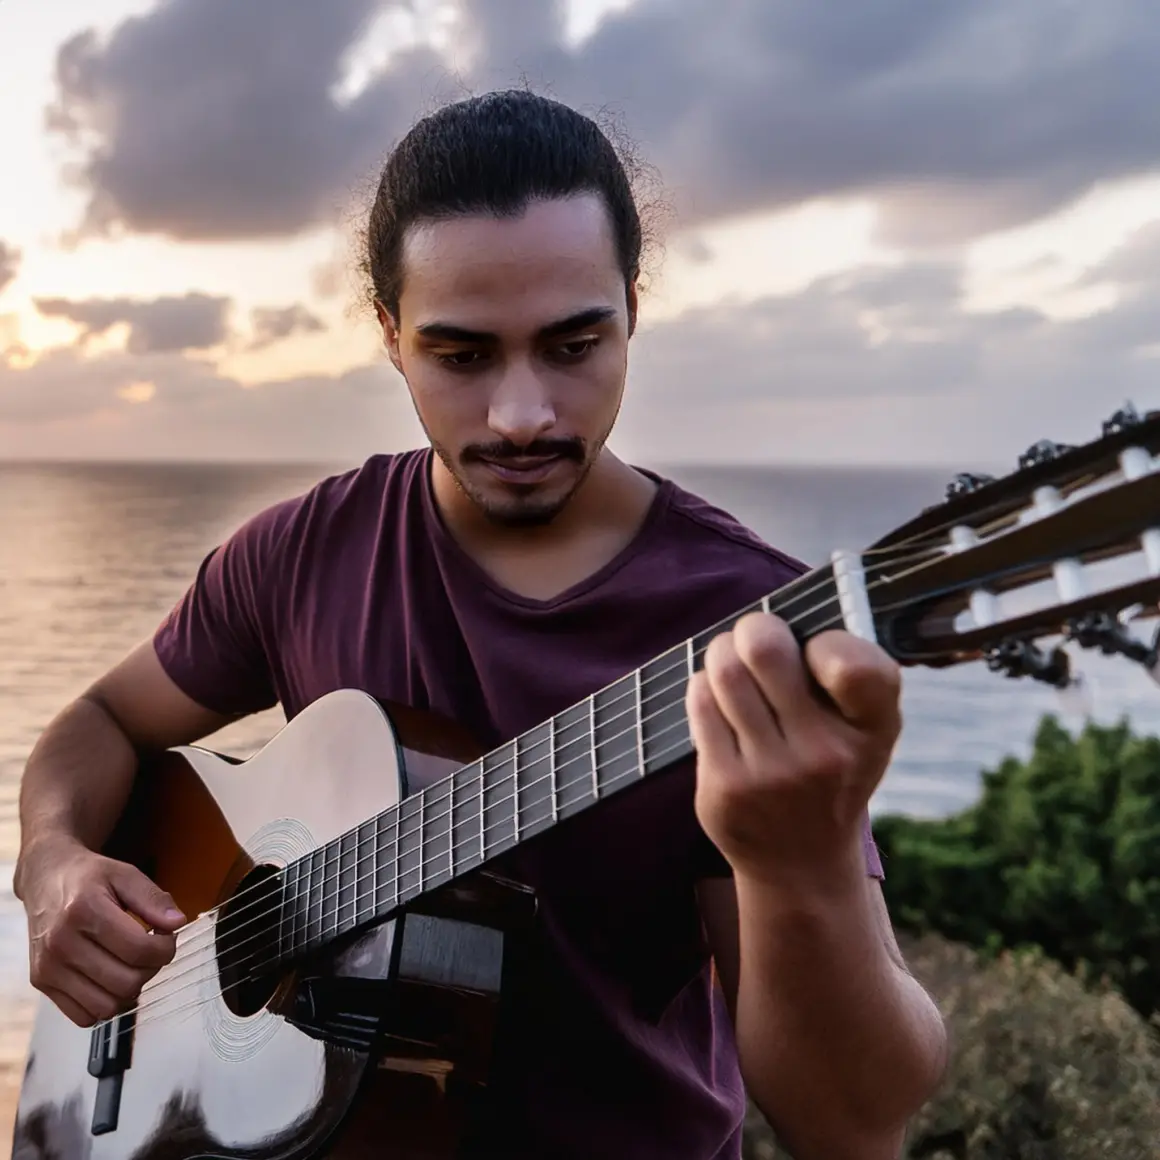 Man playing an acoustic guitar by ocean at sunset prompt output 1